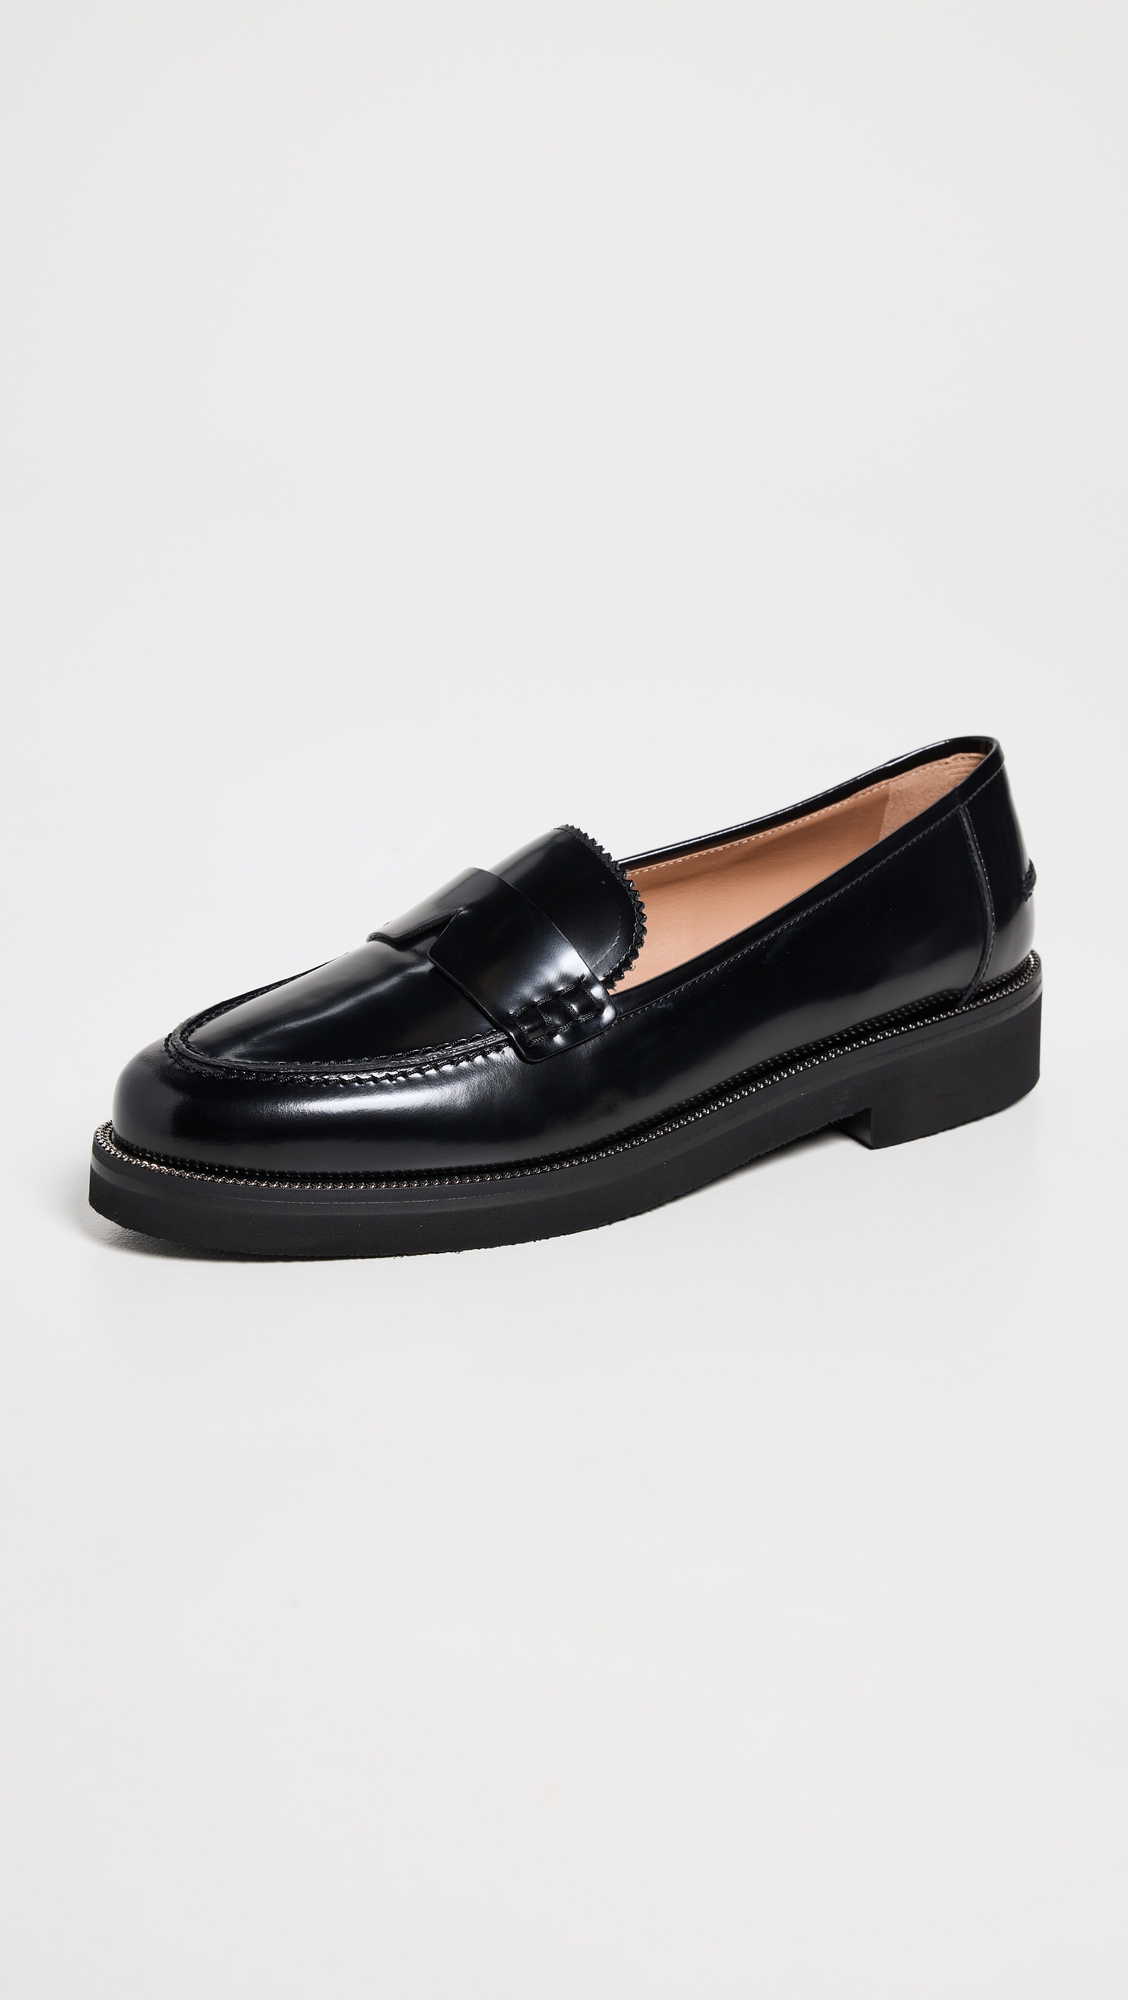 black leather loafers for women